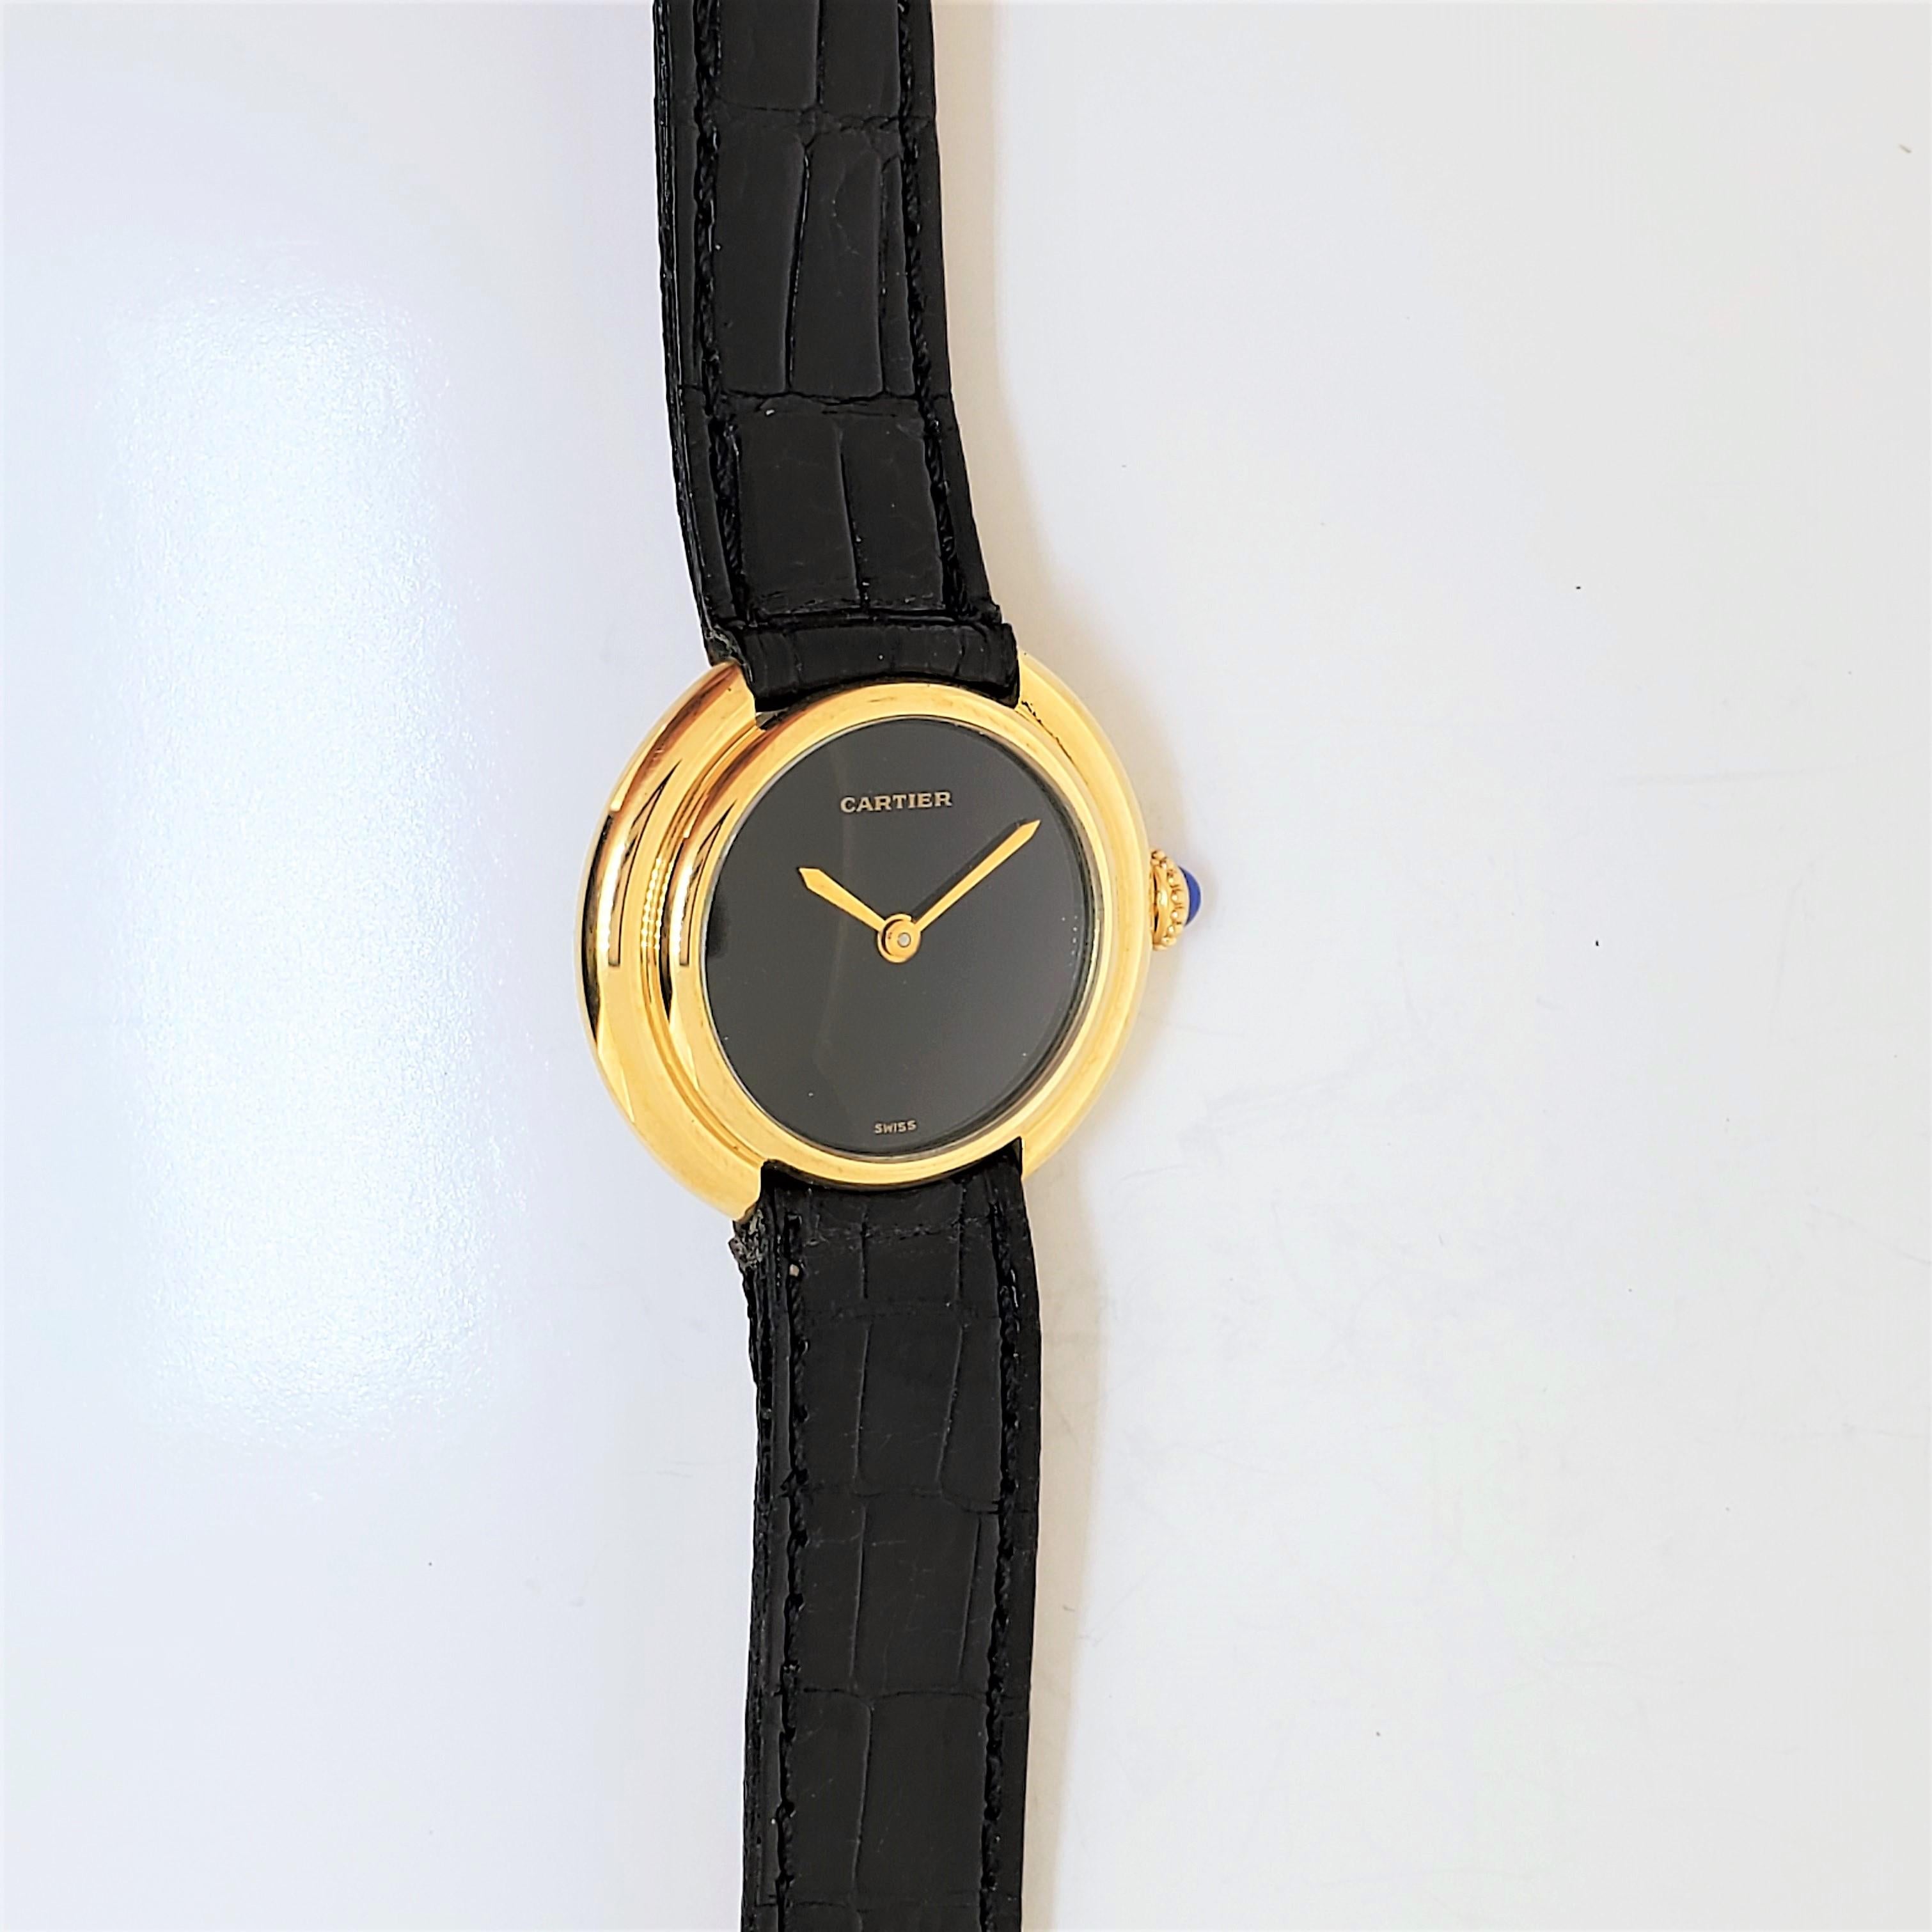 Vintage Cartier Paris Vendome Small Watch manual wind. Choice of Black or Roman  For Sale 6